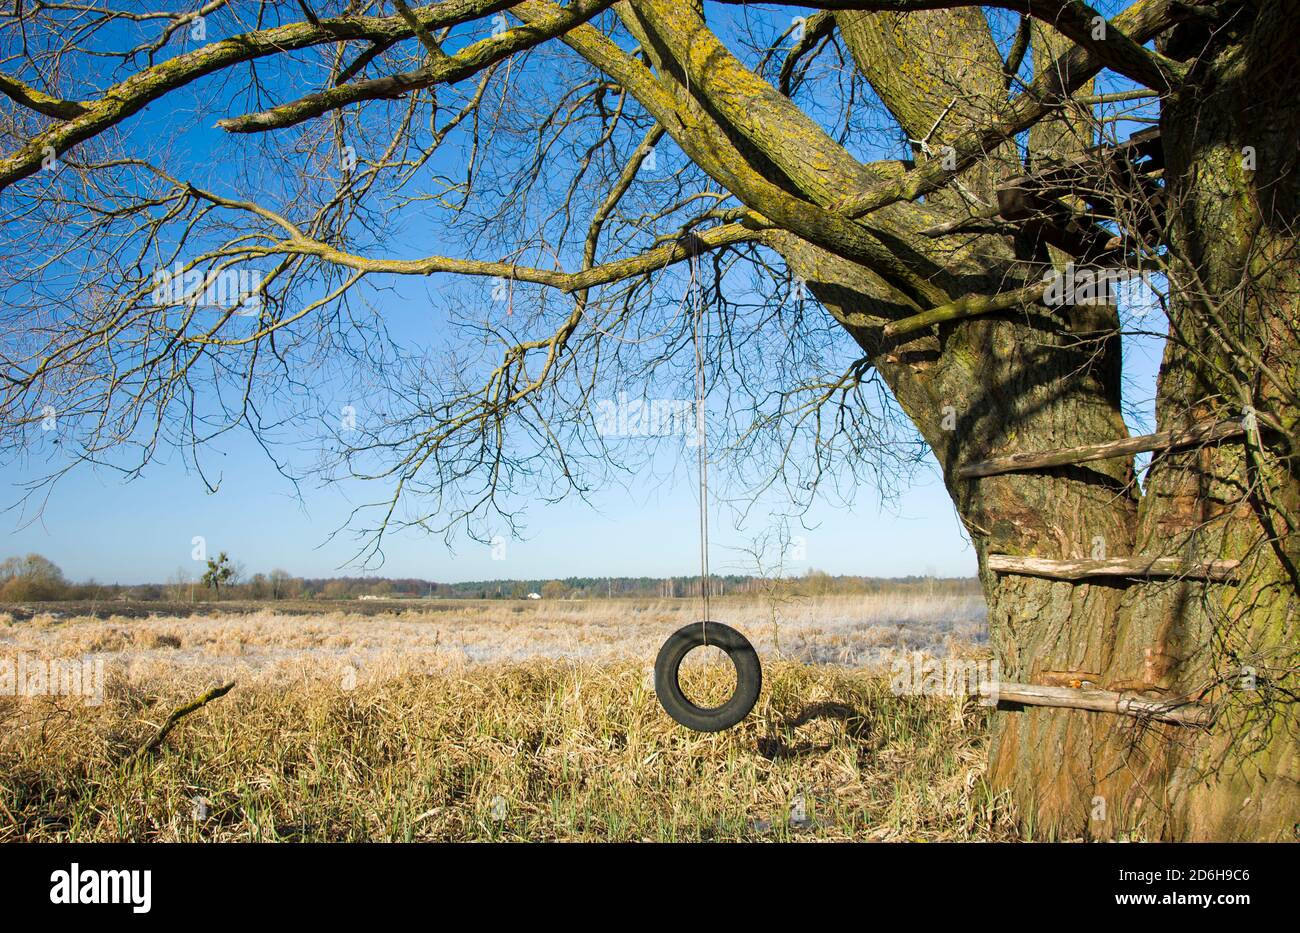 Tire swing hanging from an old tree Stock Photo